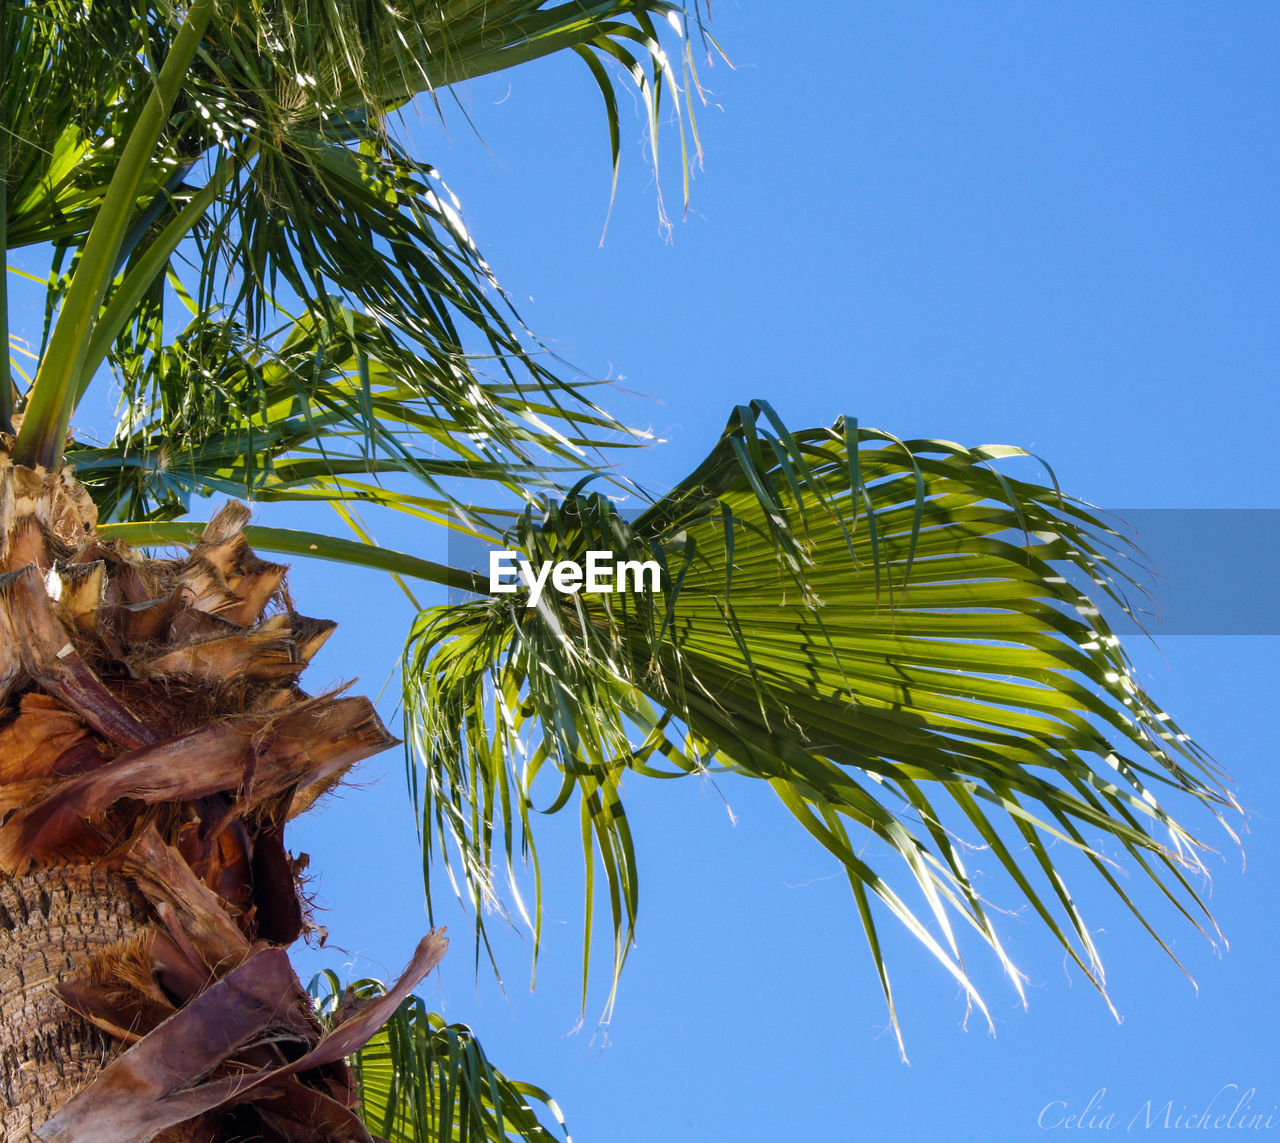 tree, plant, palm tree, nature, sky, leaf, tropical climate, blue, tropics, palm leaf, branch, clear sky, low angle view, flower, no people, plant part, growth, beauty in nature, green, outdoors, sunlight, coconut palm tree, day, jungle, sunny, tropical tree, environment, tranquility